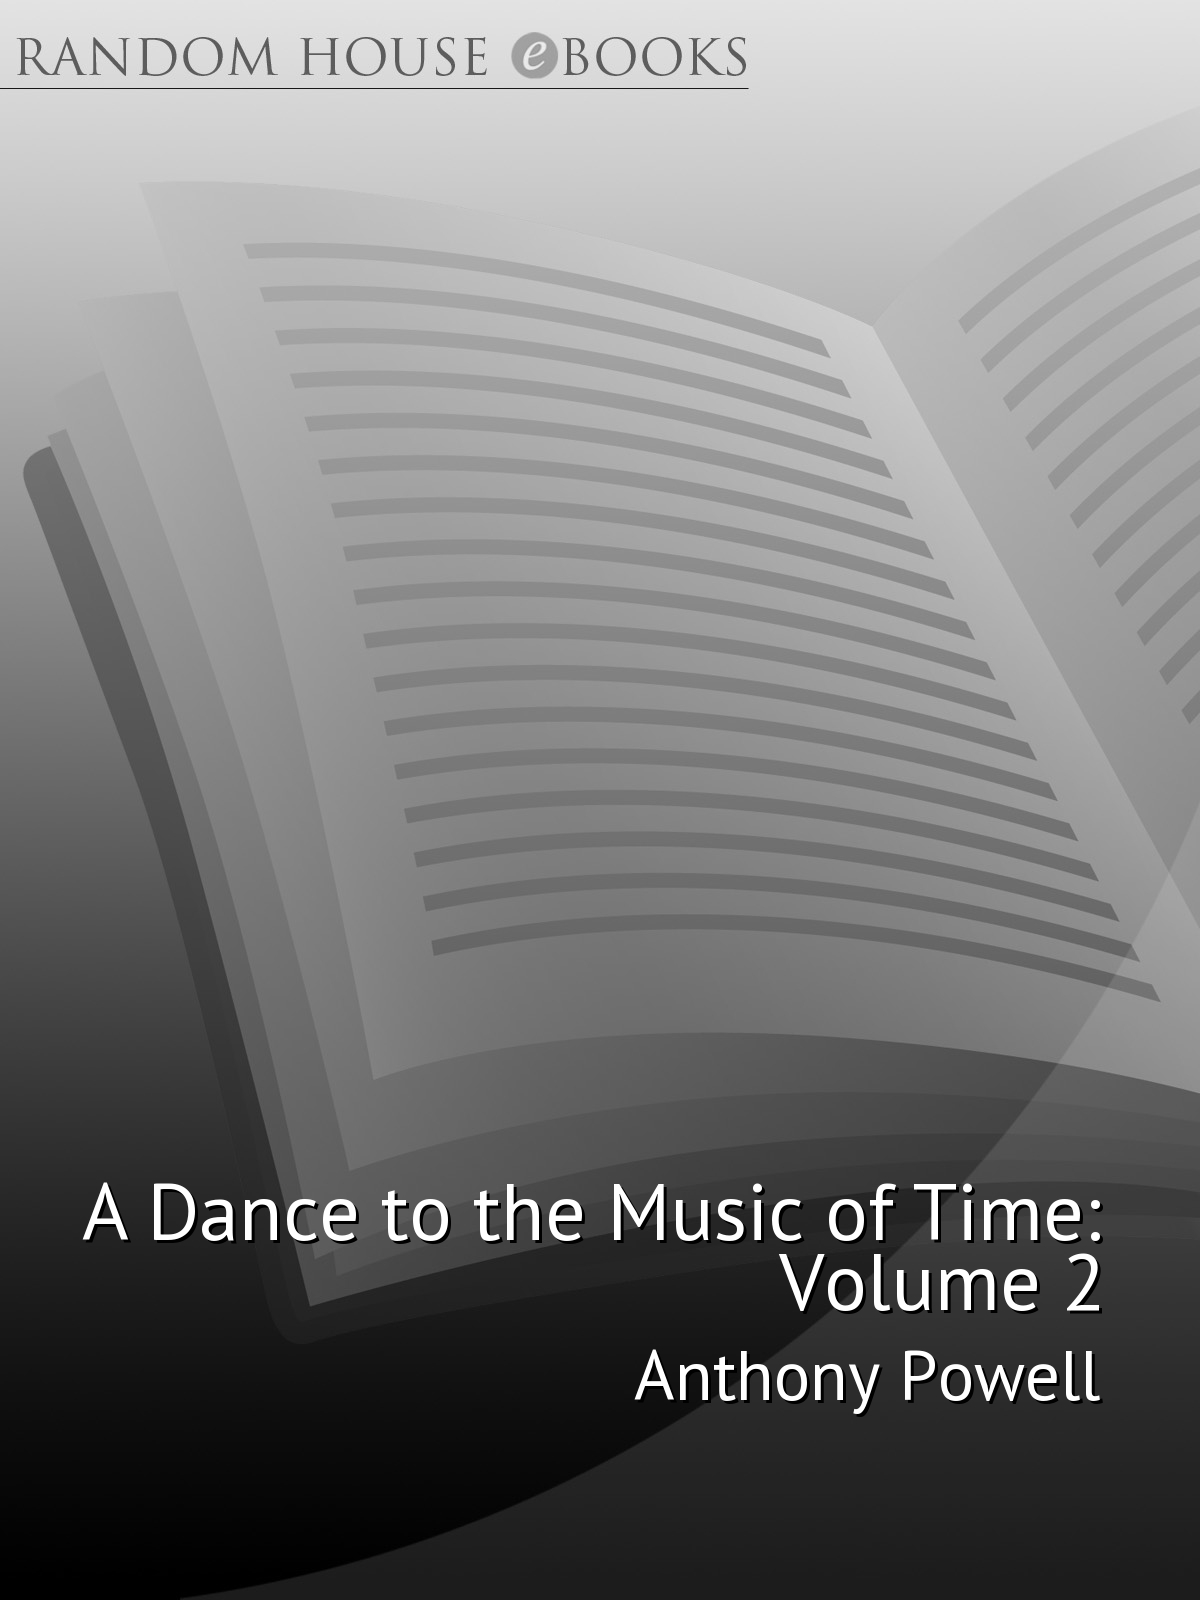 A Dance to the Music of Time, Volume 2